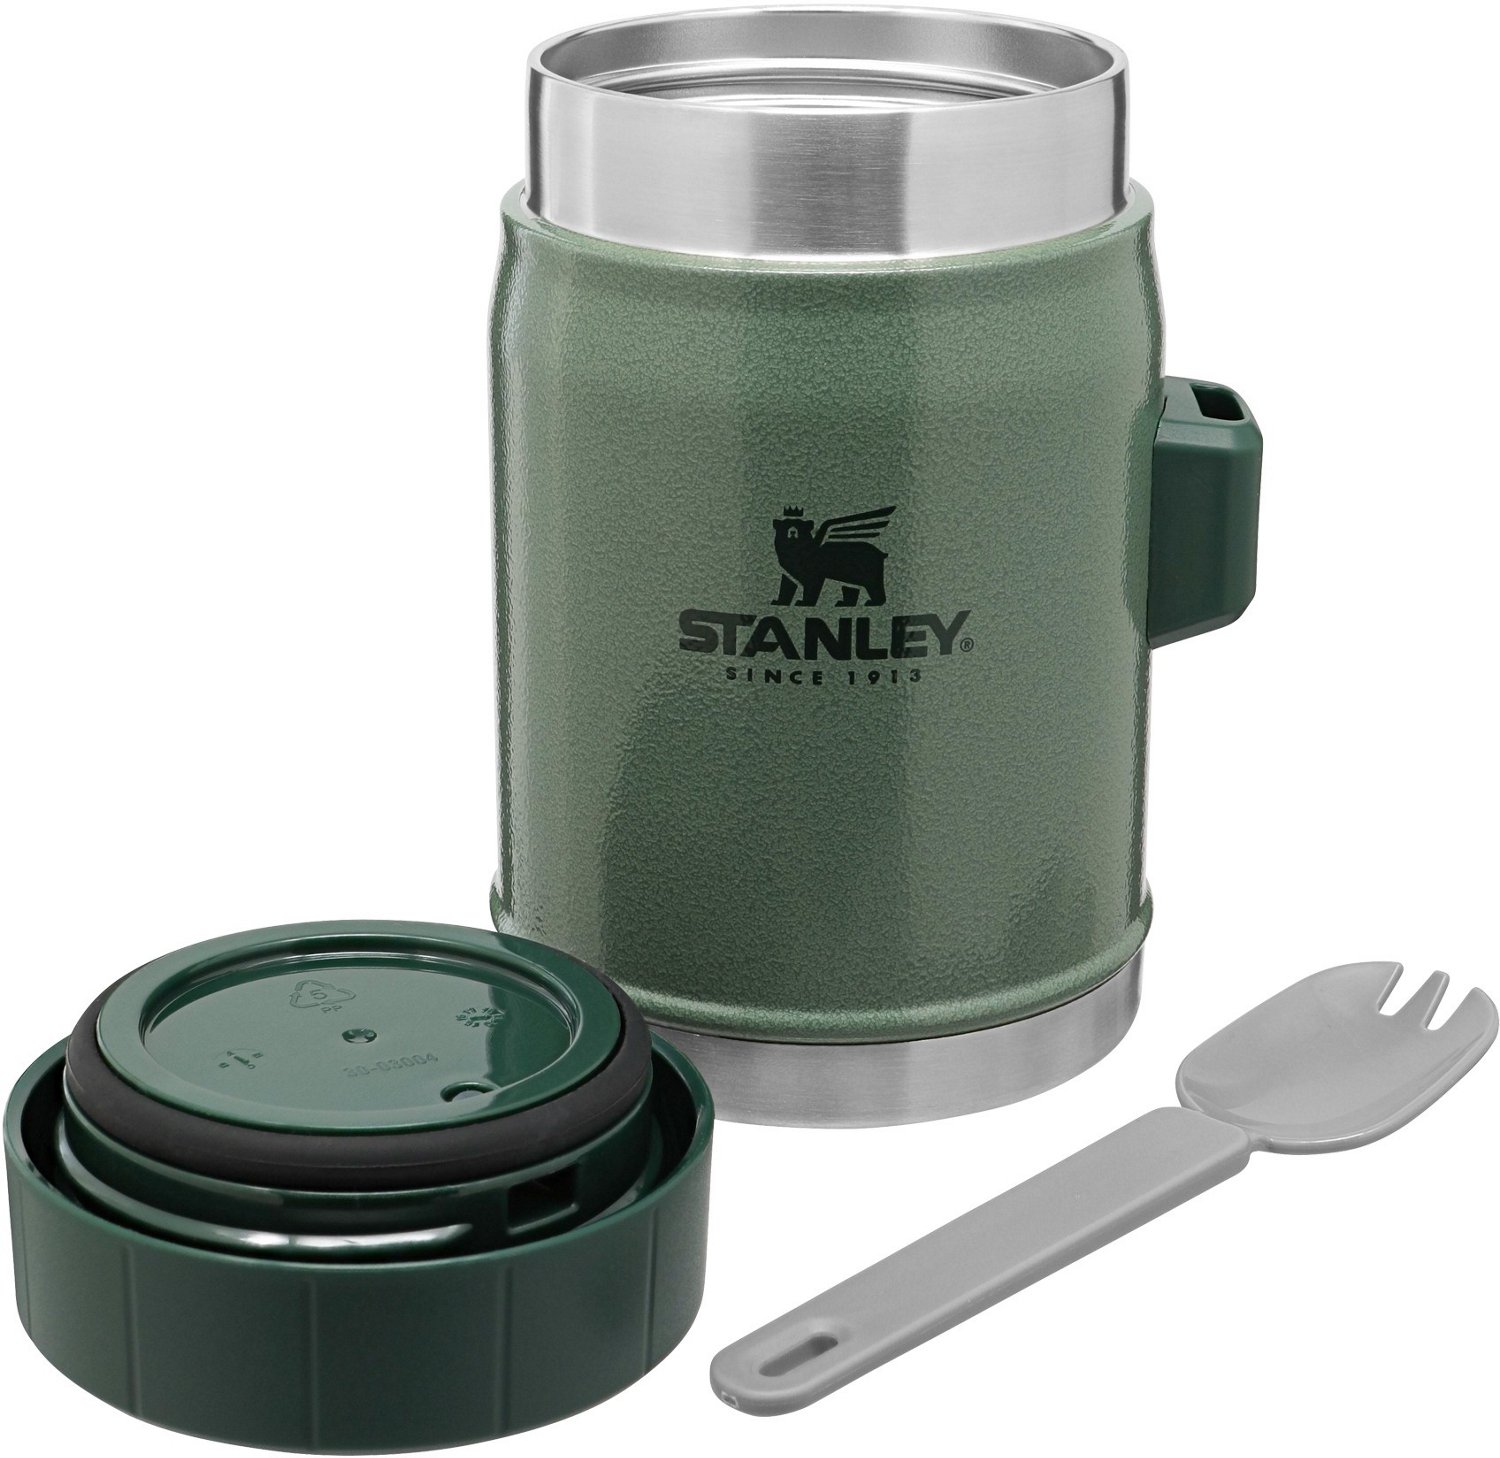  Stanley Heritage Insulated Food Jar for Kids (8 and